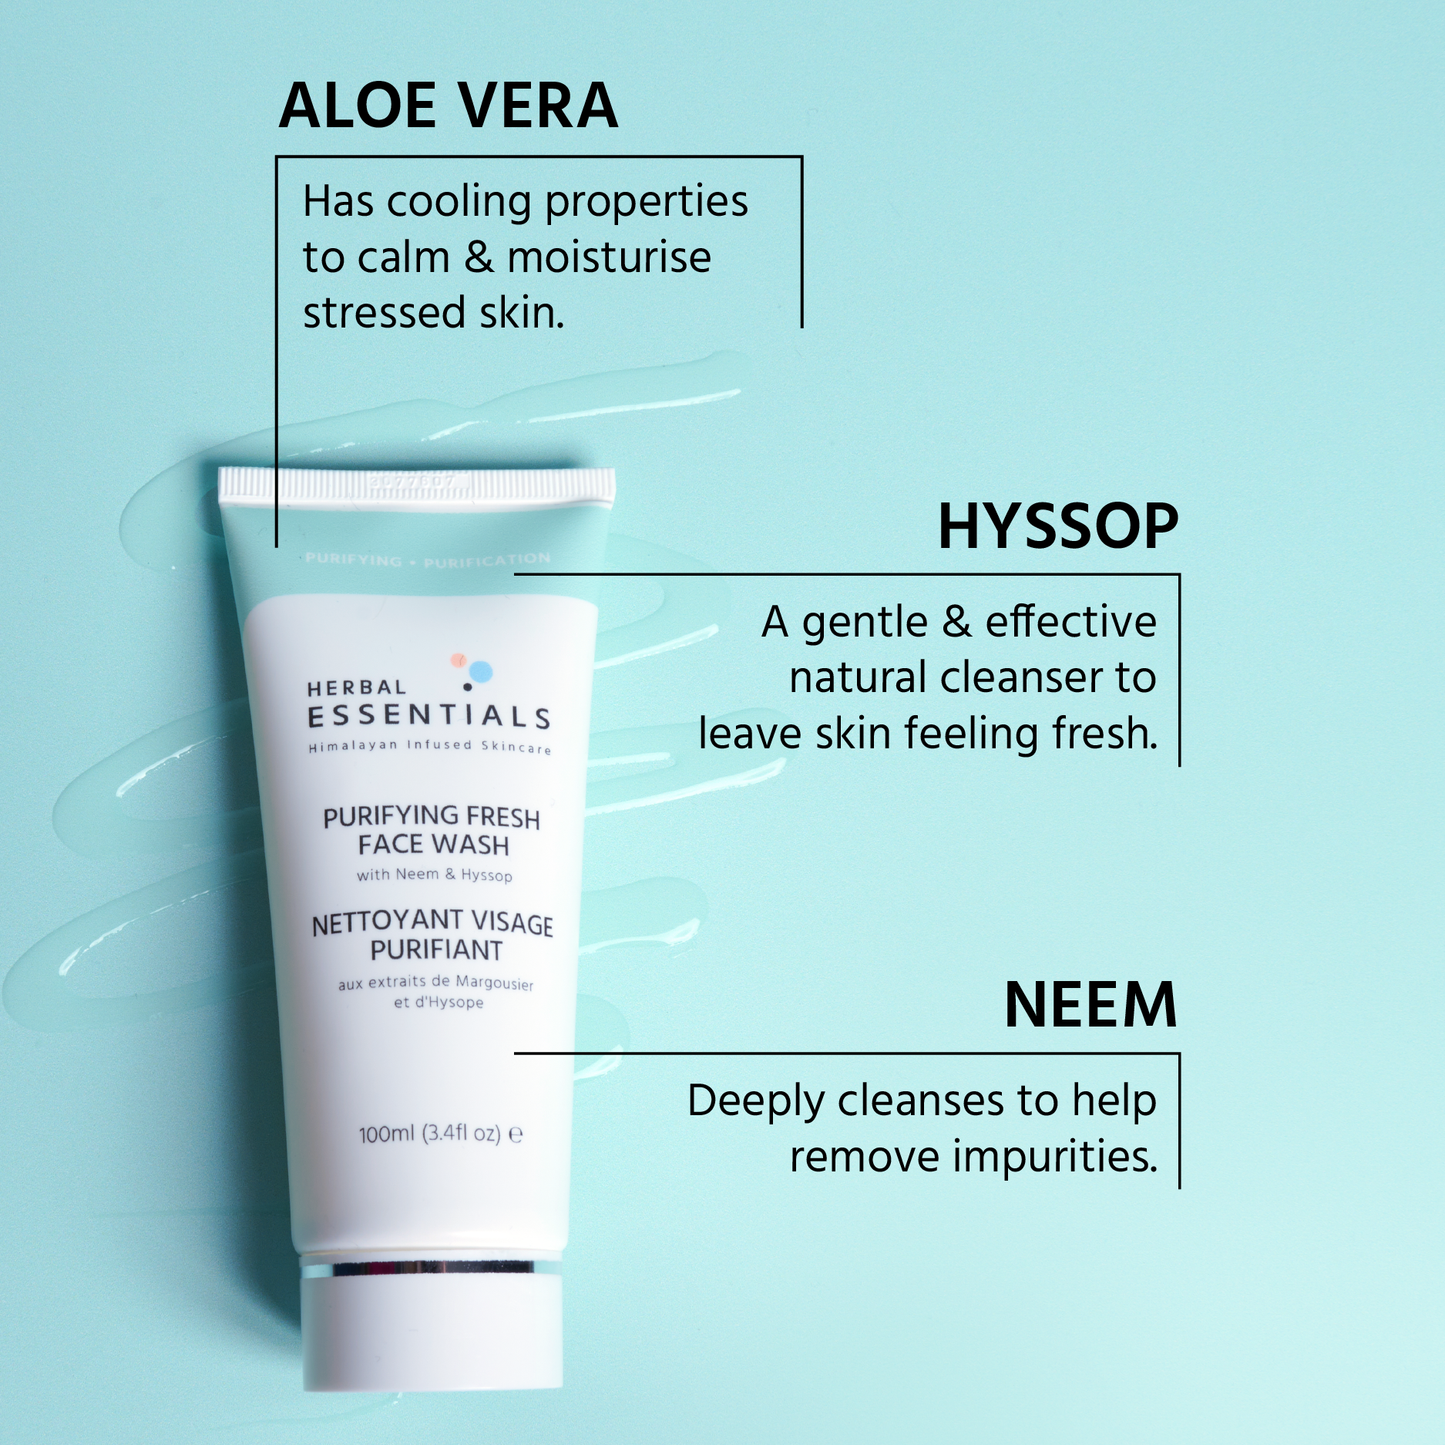 Herbal Essentials Purifying Fresh Face Wash with Neem & Hyssop Extracts